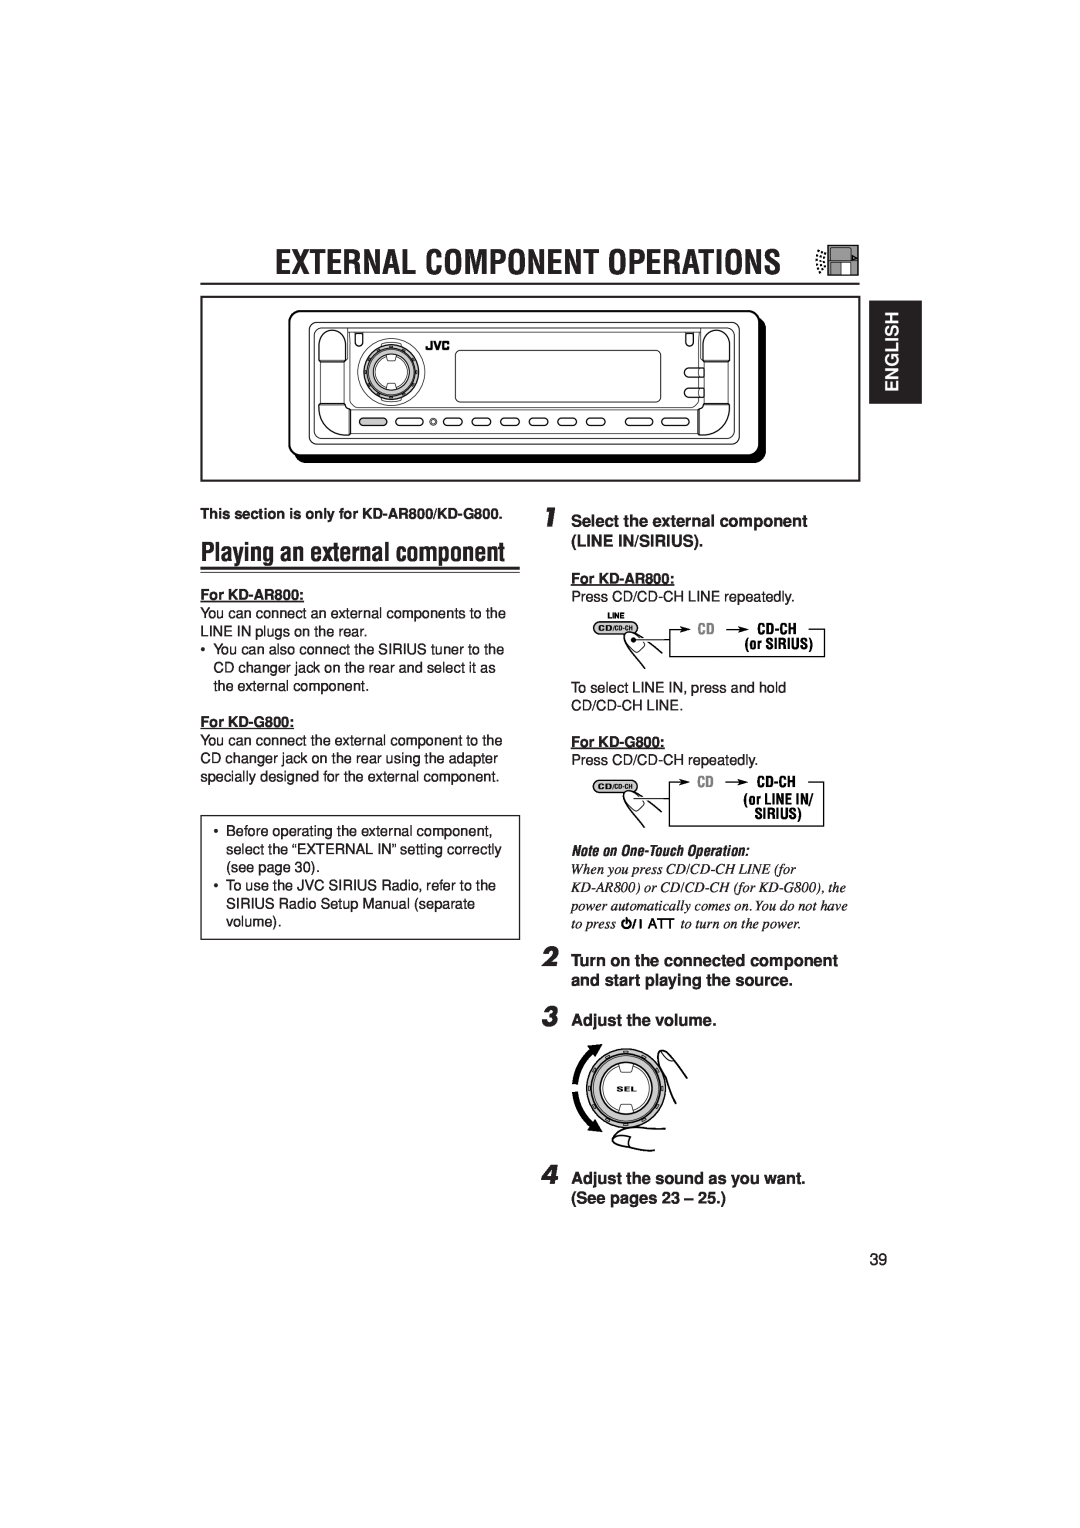 JVC KD-AR800 External Component Operations, Playing an external component, 1Select the external component LINE IN/SIRIUS 